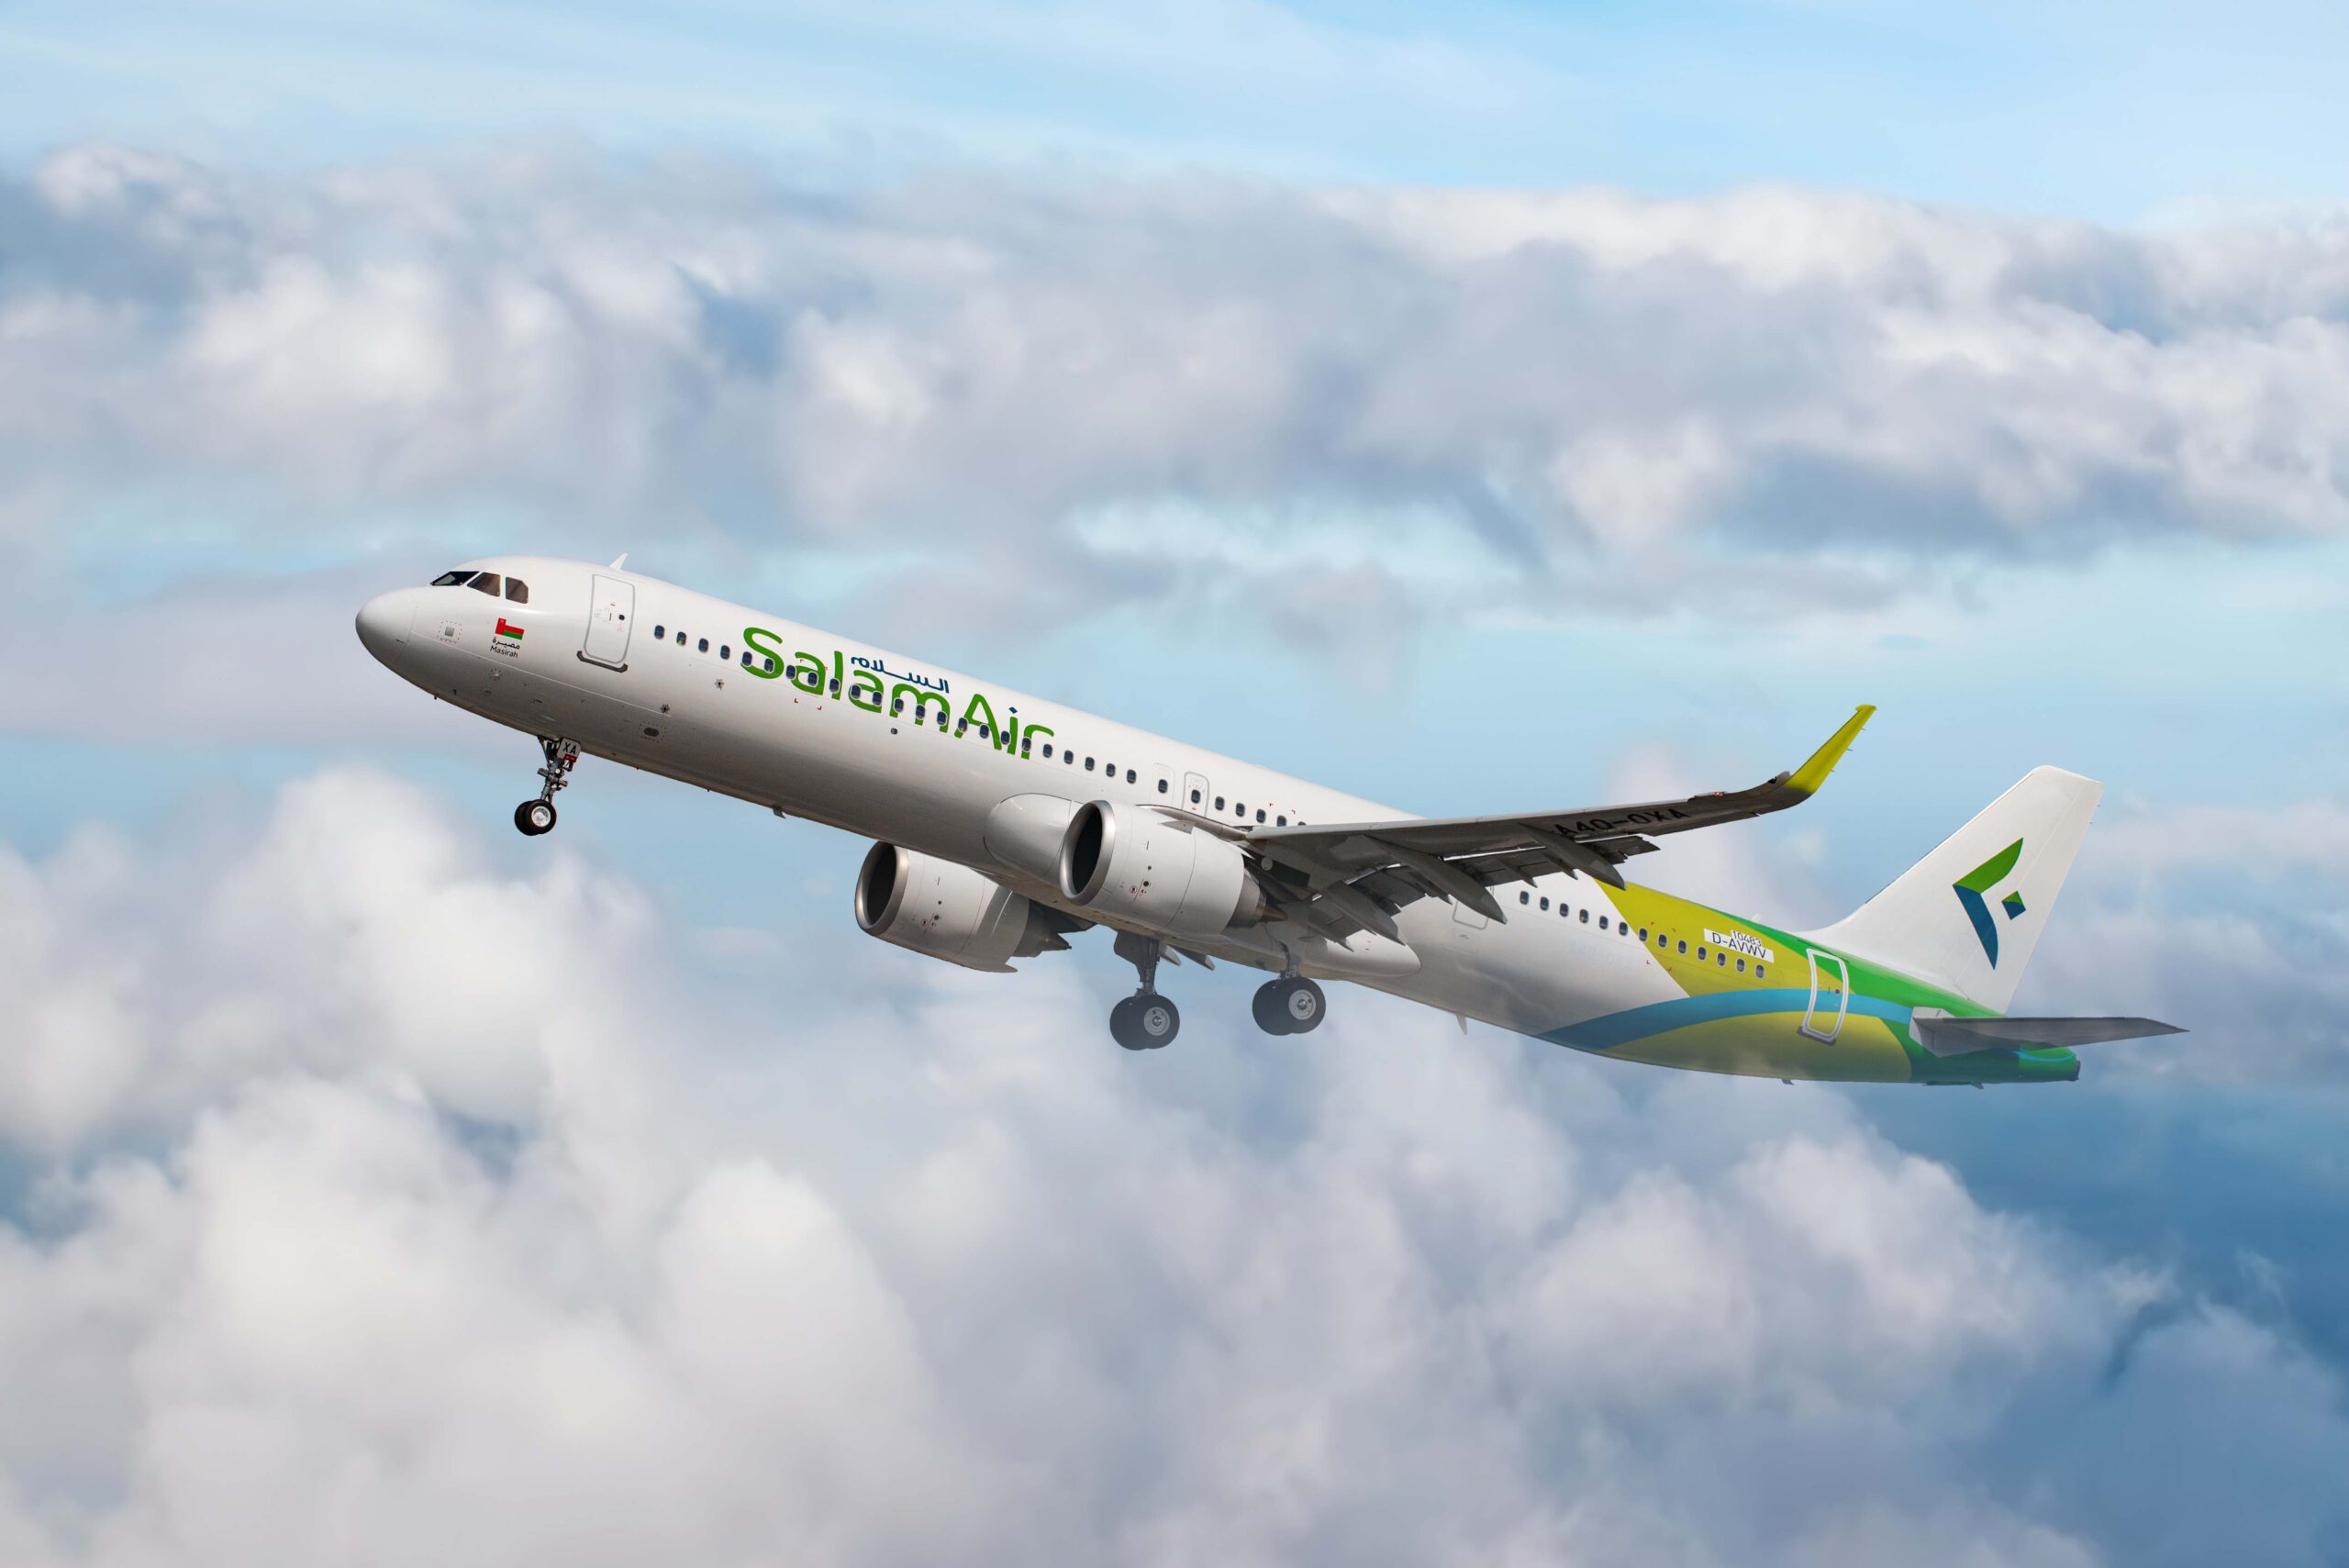 SalamAir to Launch Delhi Route on July 2nd